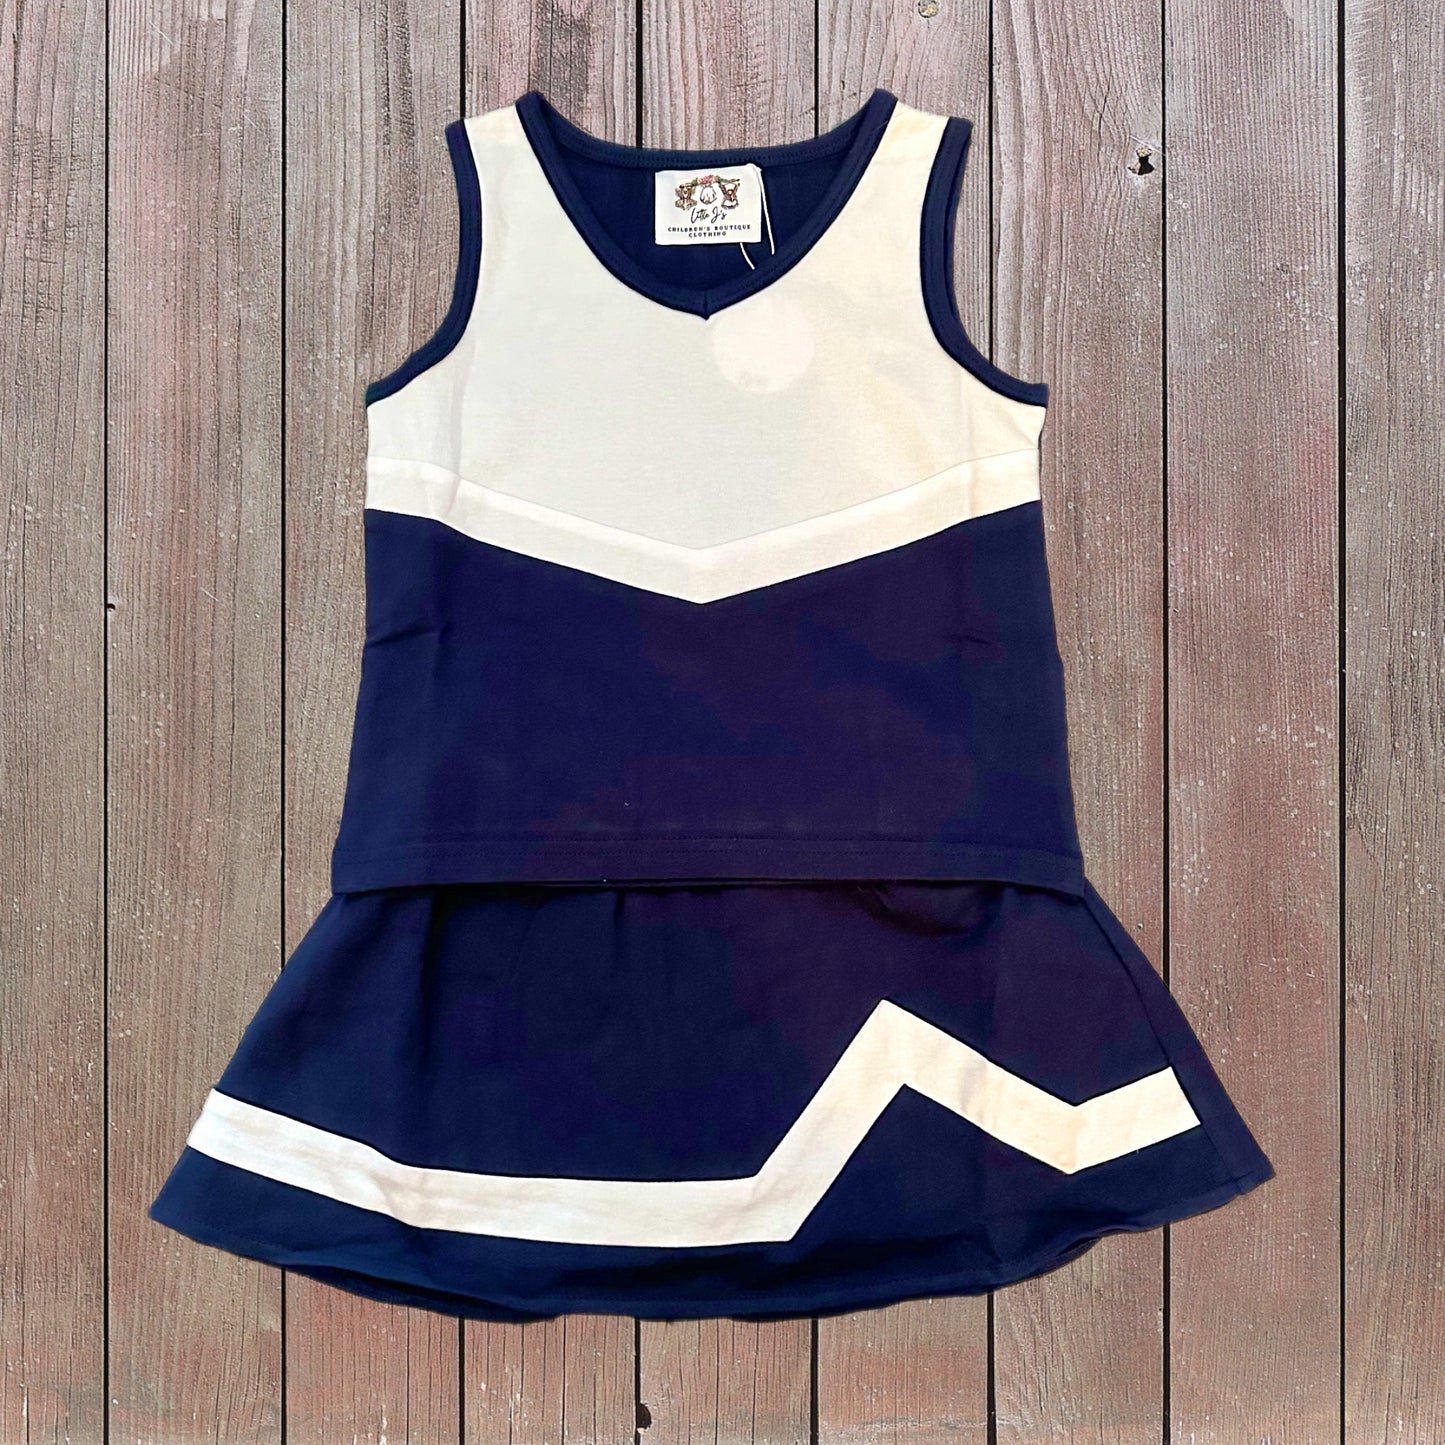 Cheer Outfits Collection Navy And White (RTS)